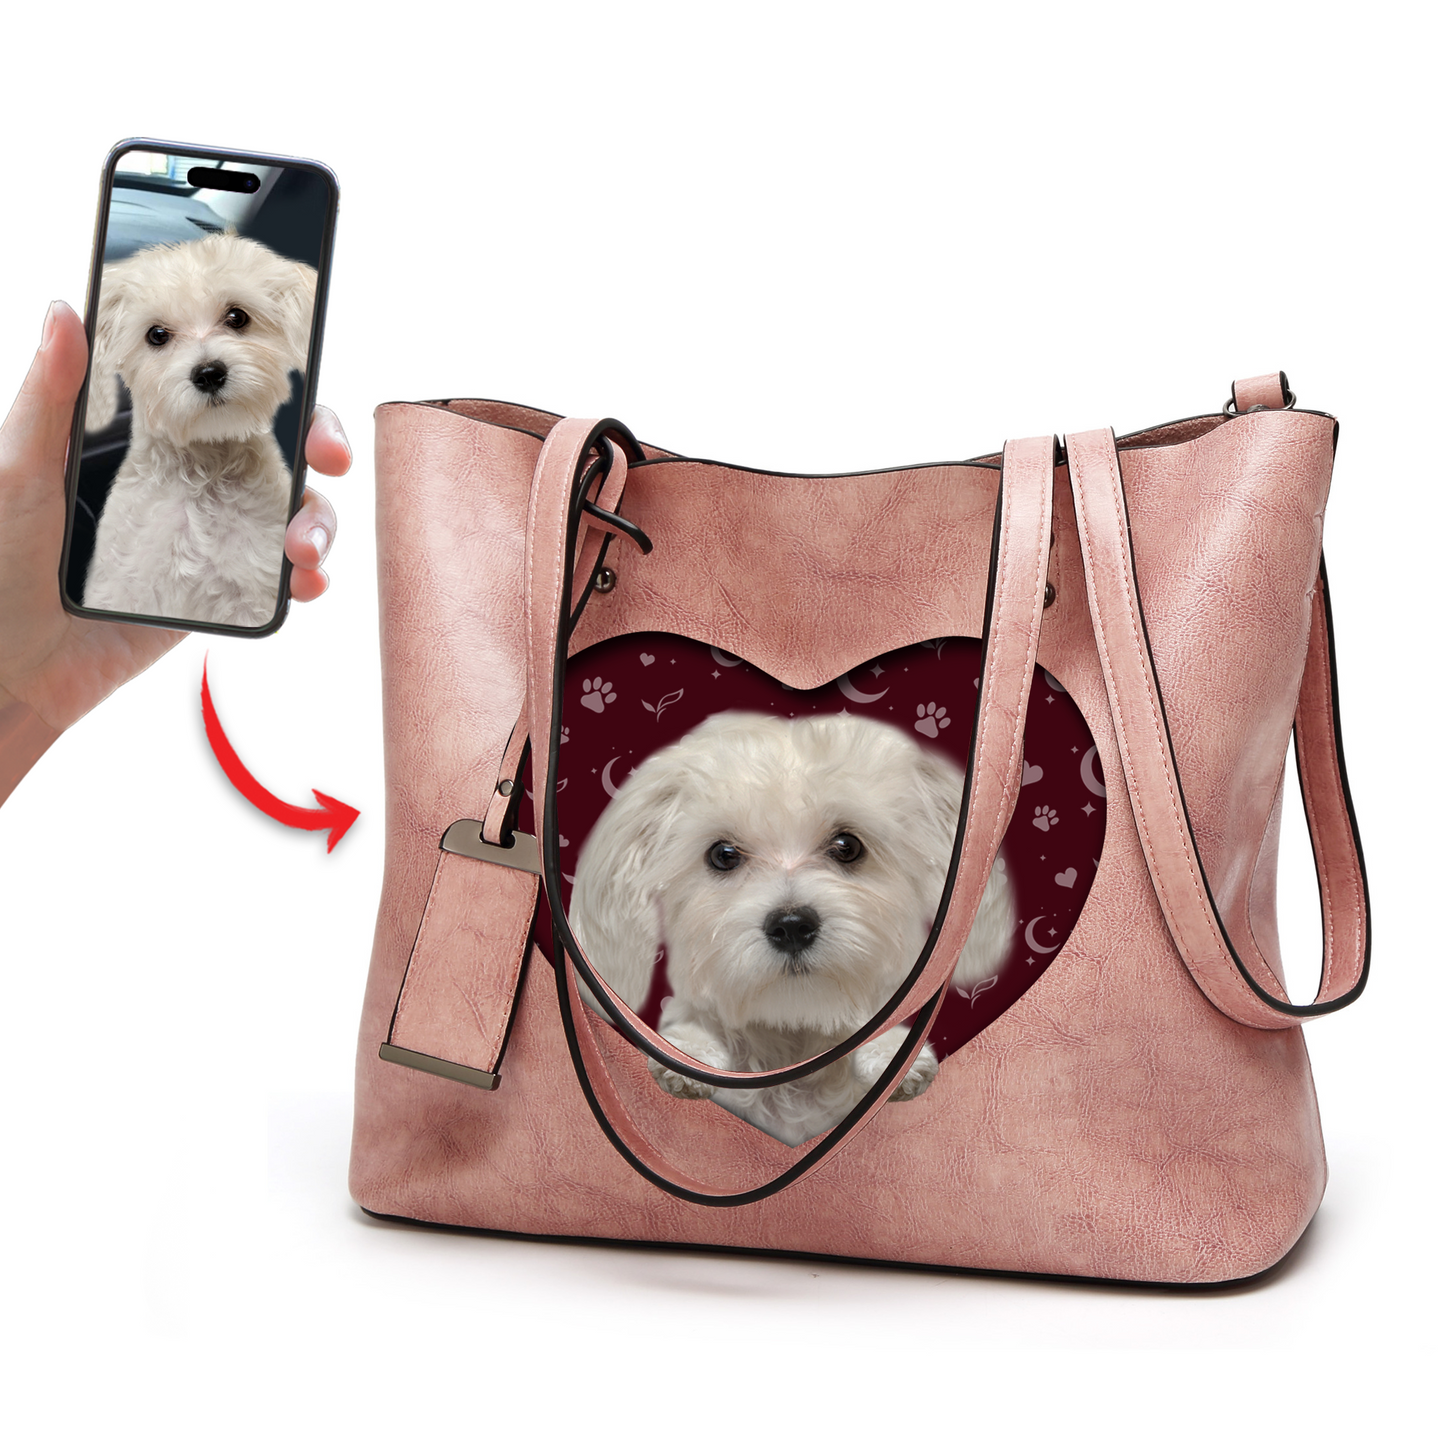 I Know I'm Cute - Personalized Glamour Handbag With Your Photo - 10